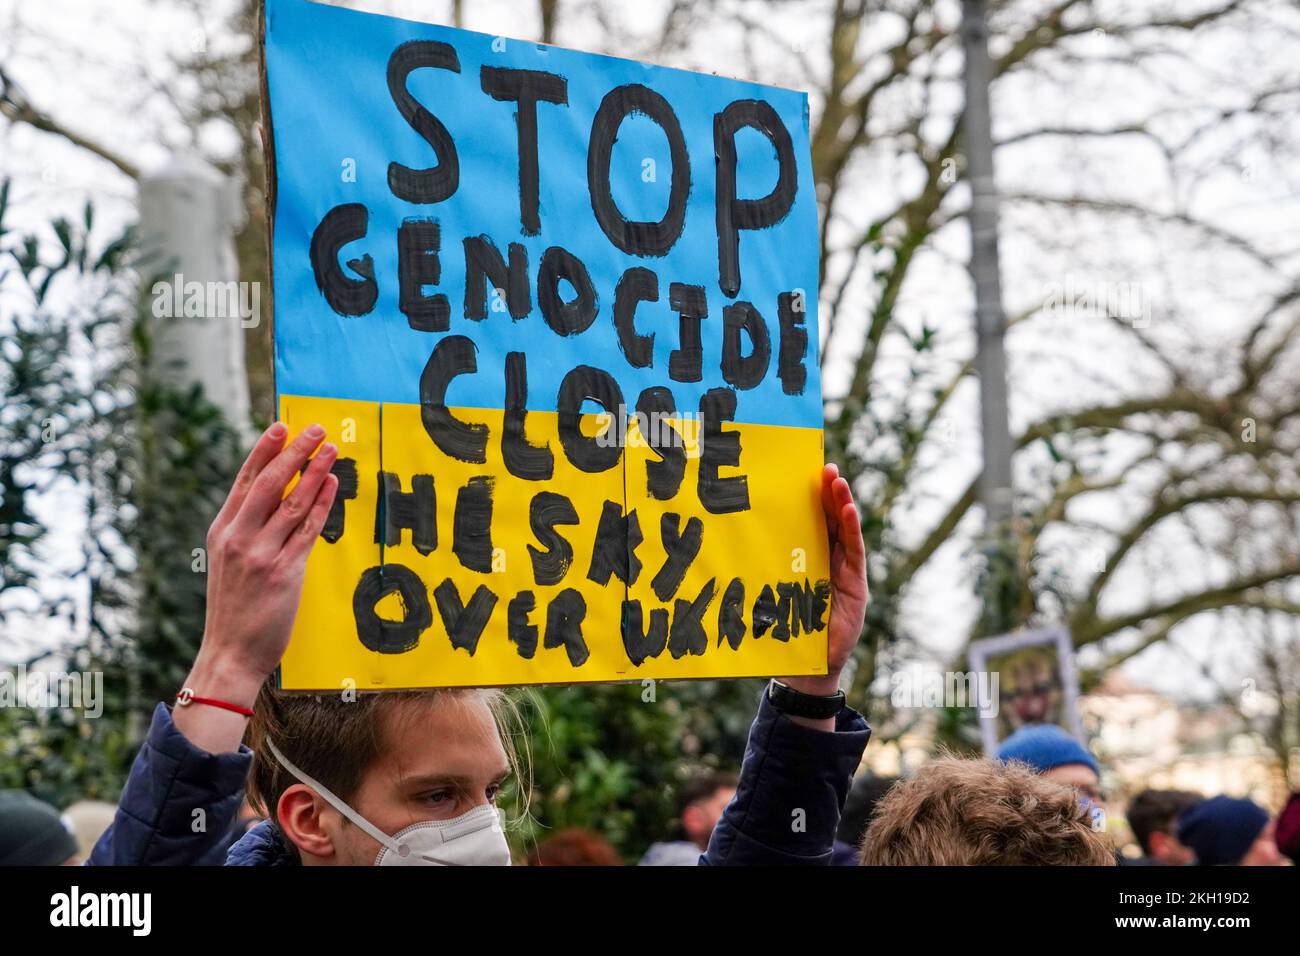 A young man holds a sign 'Stop Genocide. Close the Dky over Ukraine.' Stock Photo